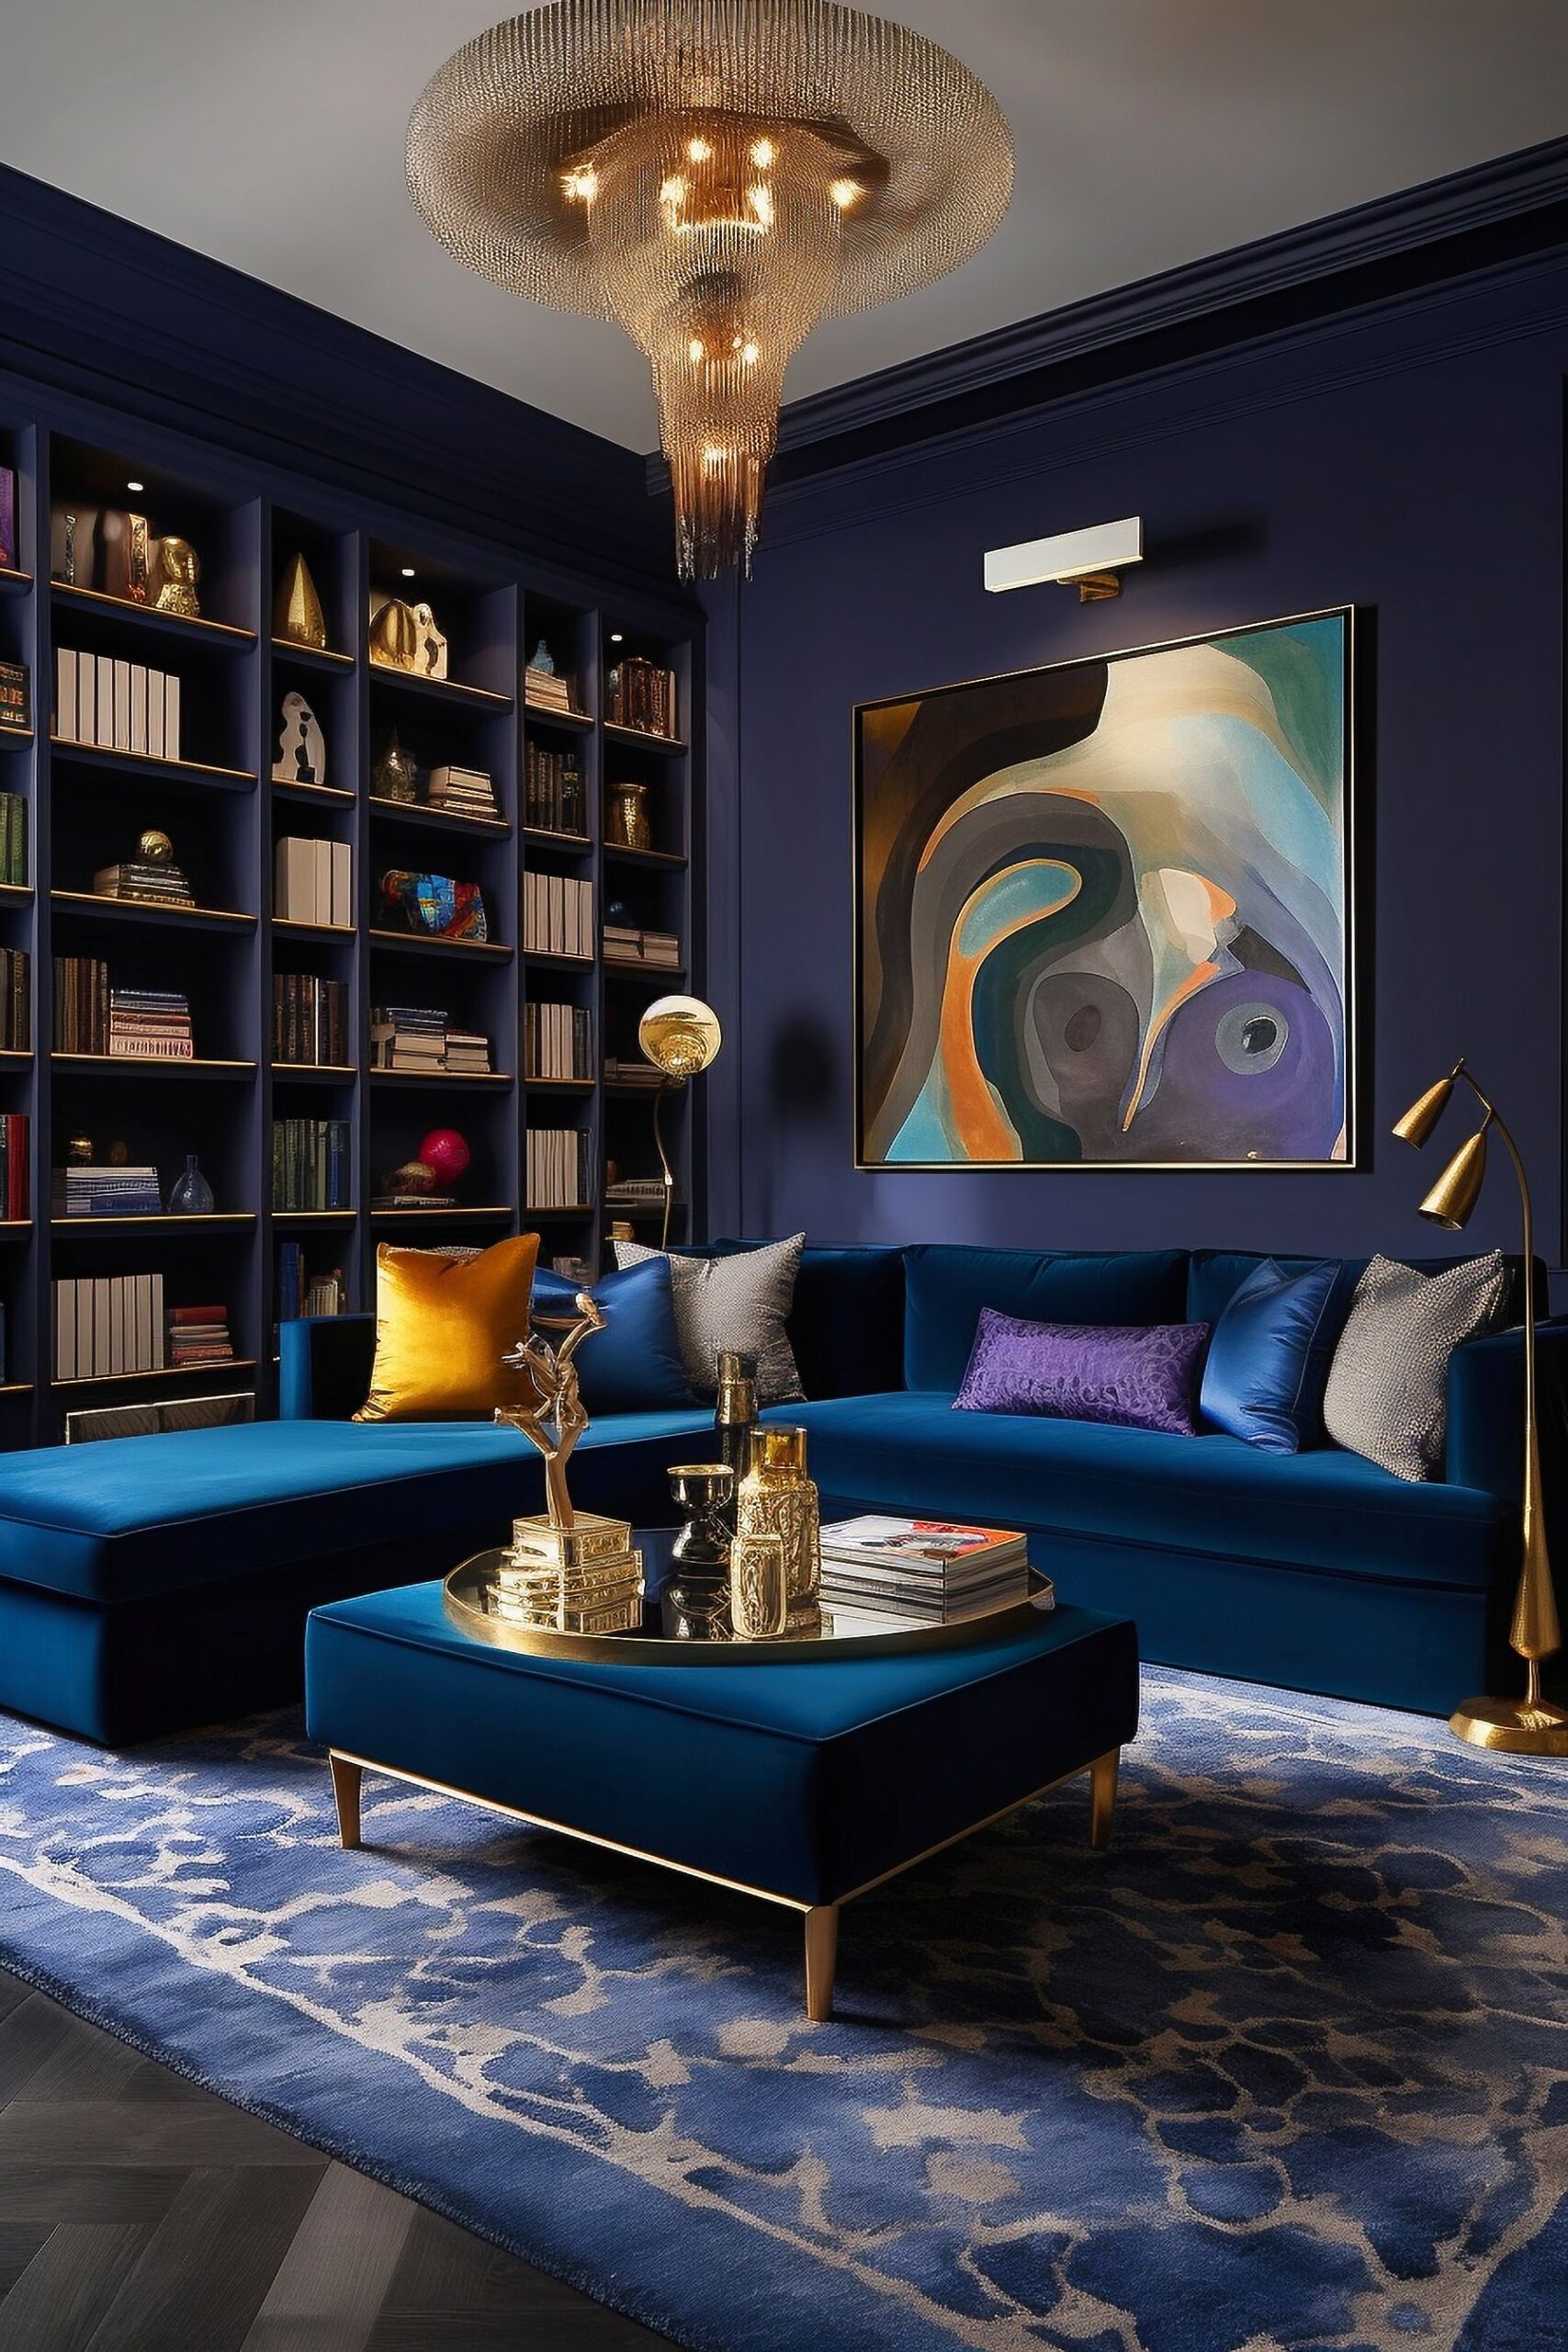 Transform Your Living Room with a Blue and Gold Theme